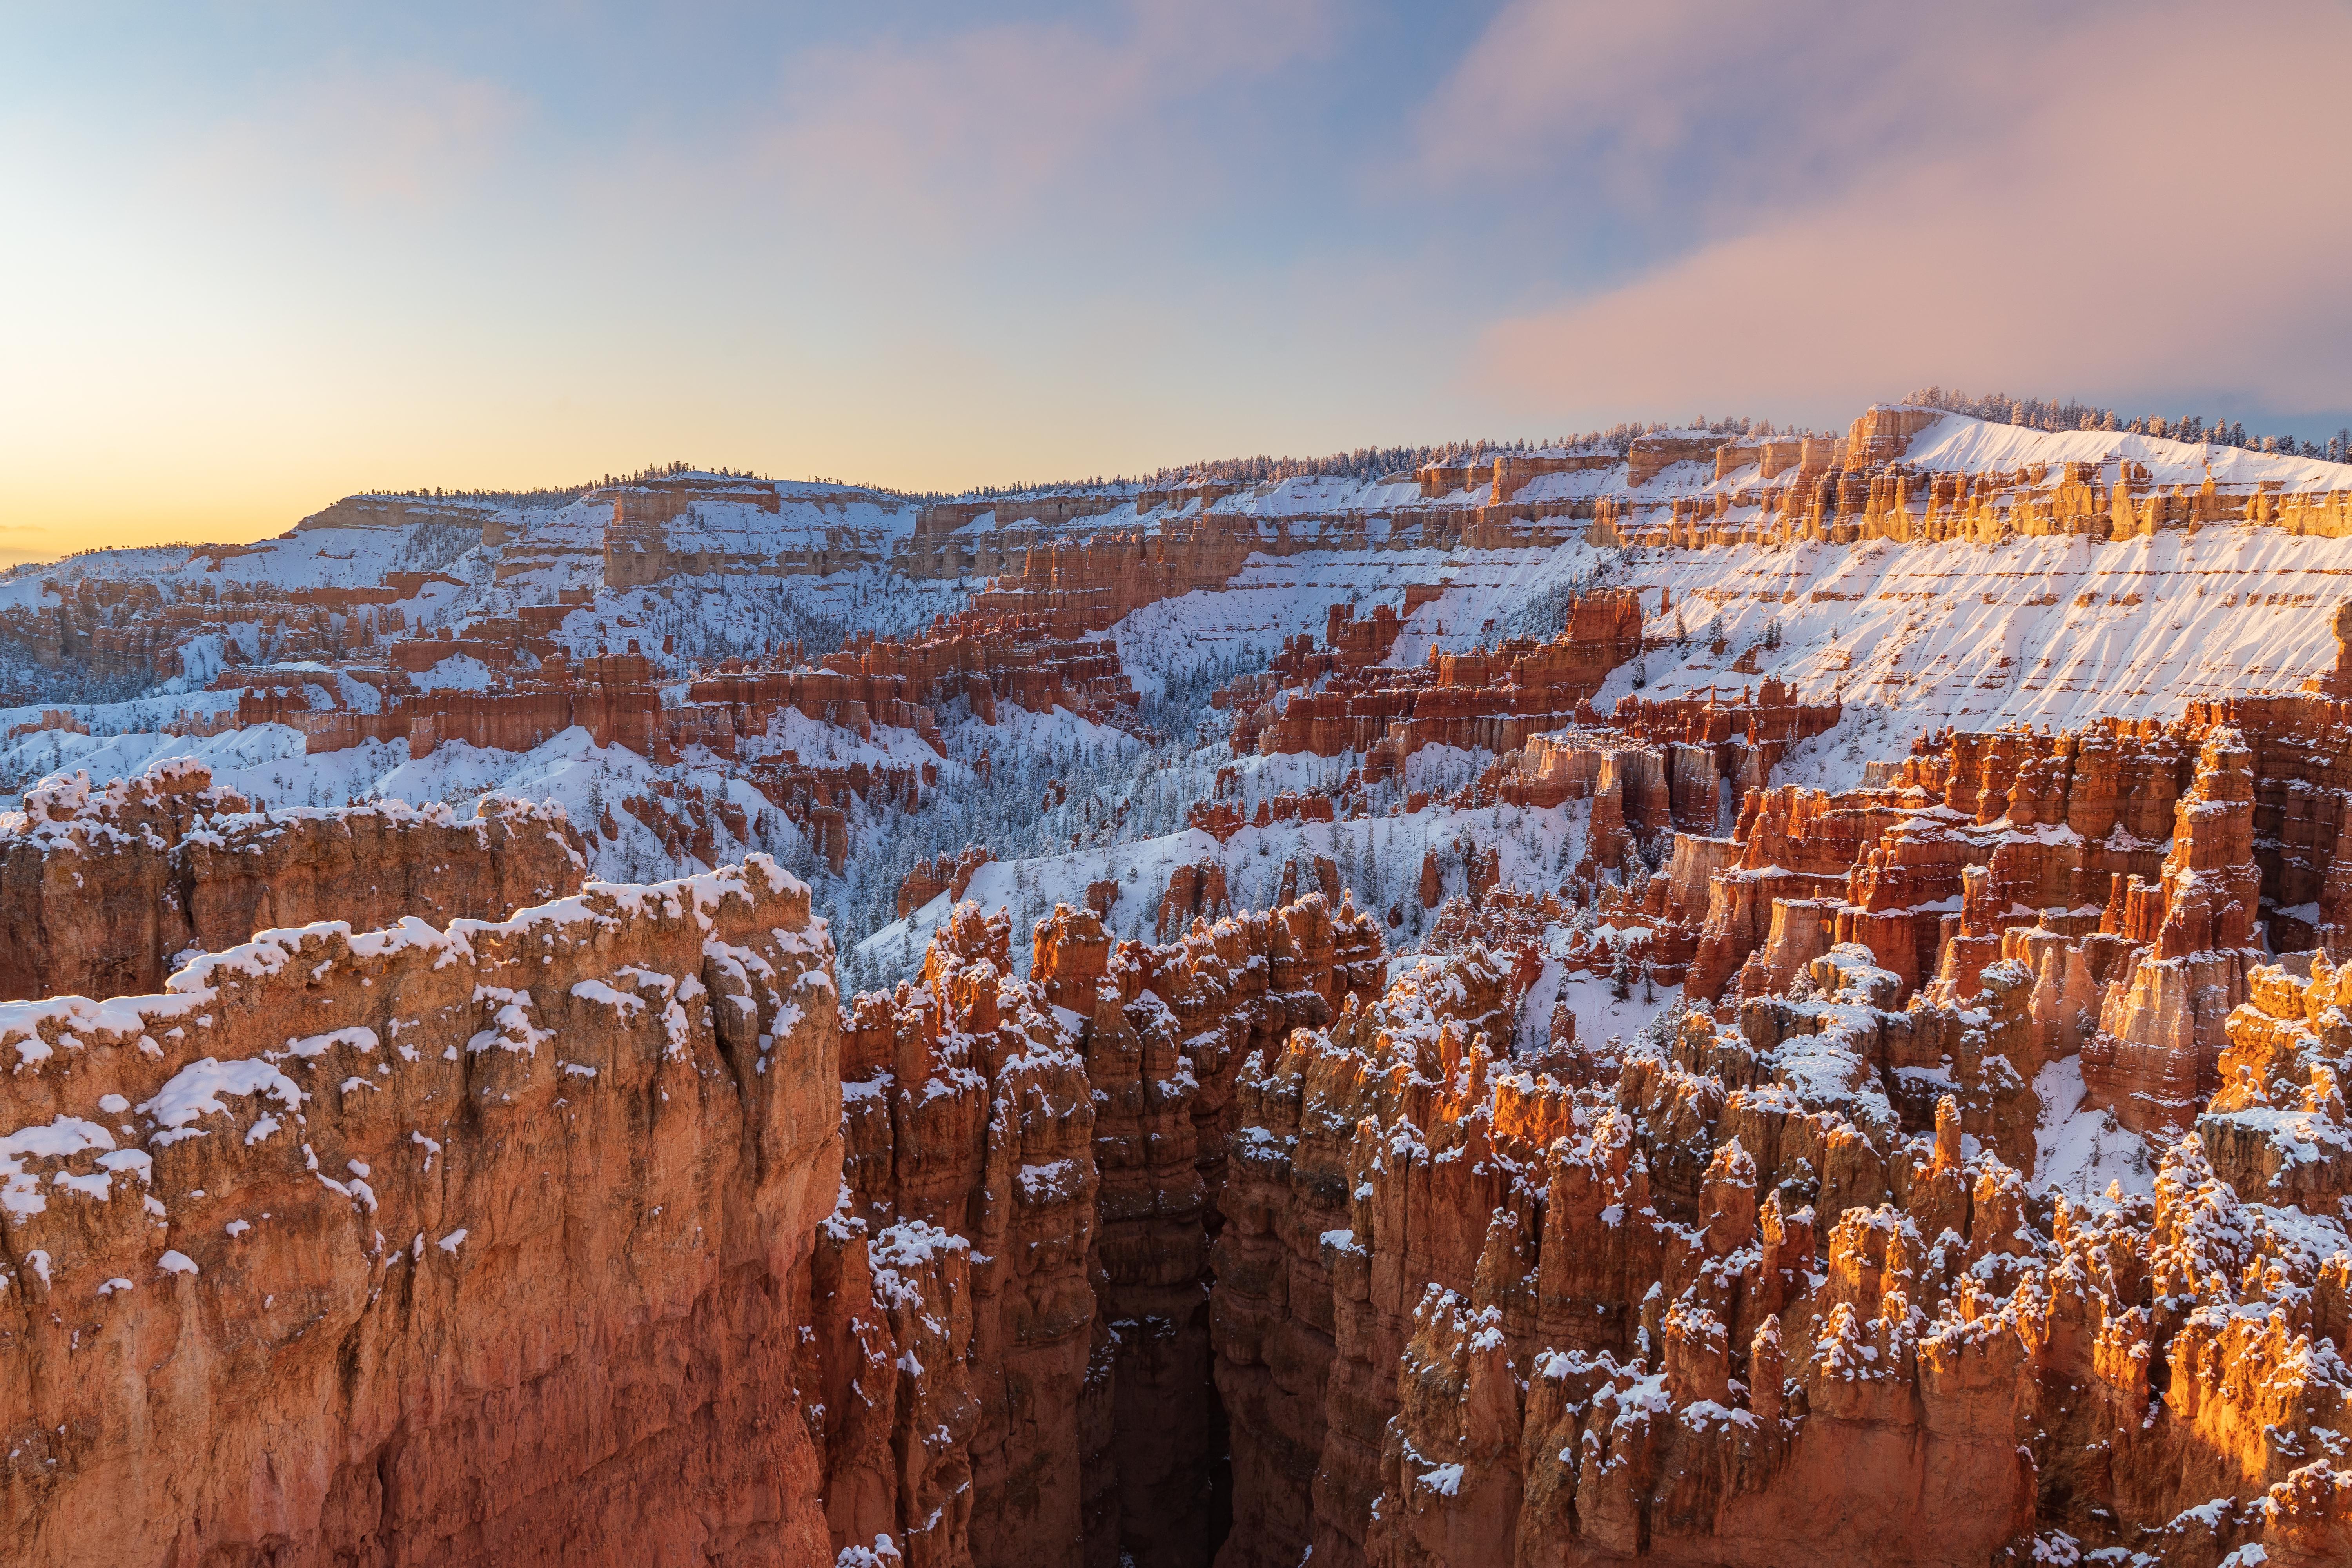 Snow blankets a red rock landscape of tall rock spires beneath an early morning sky